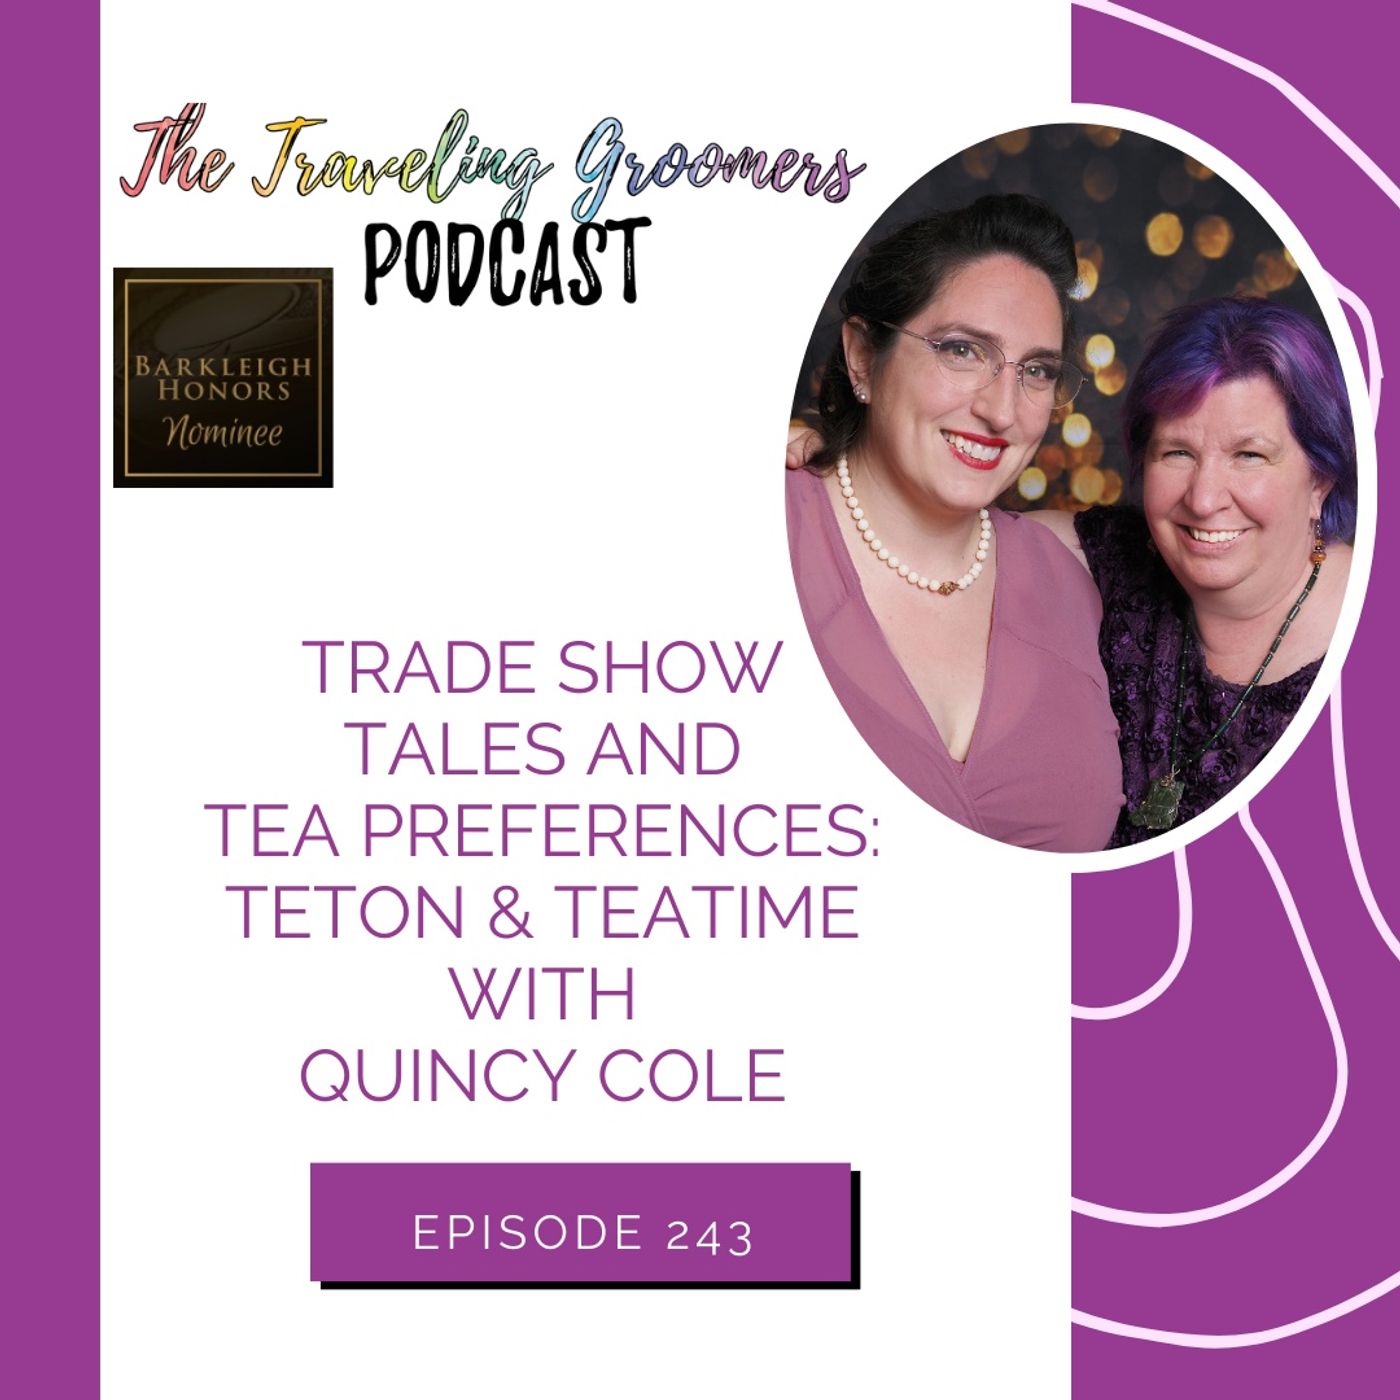 Trade Show Tales and Tea Preferences Teton & Teatime with Quincy Cole